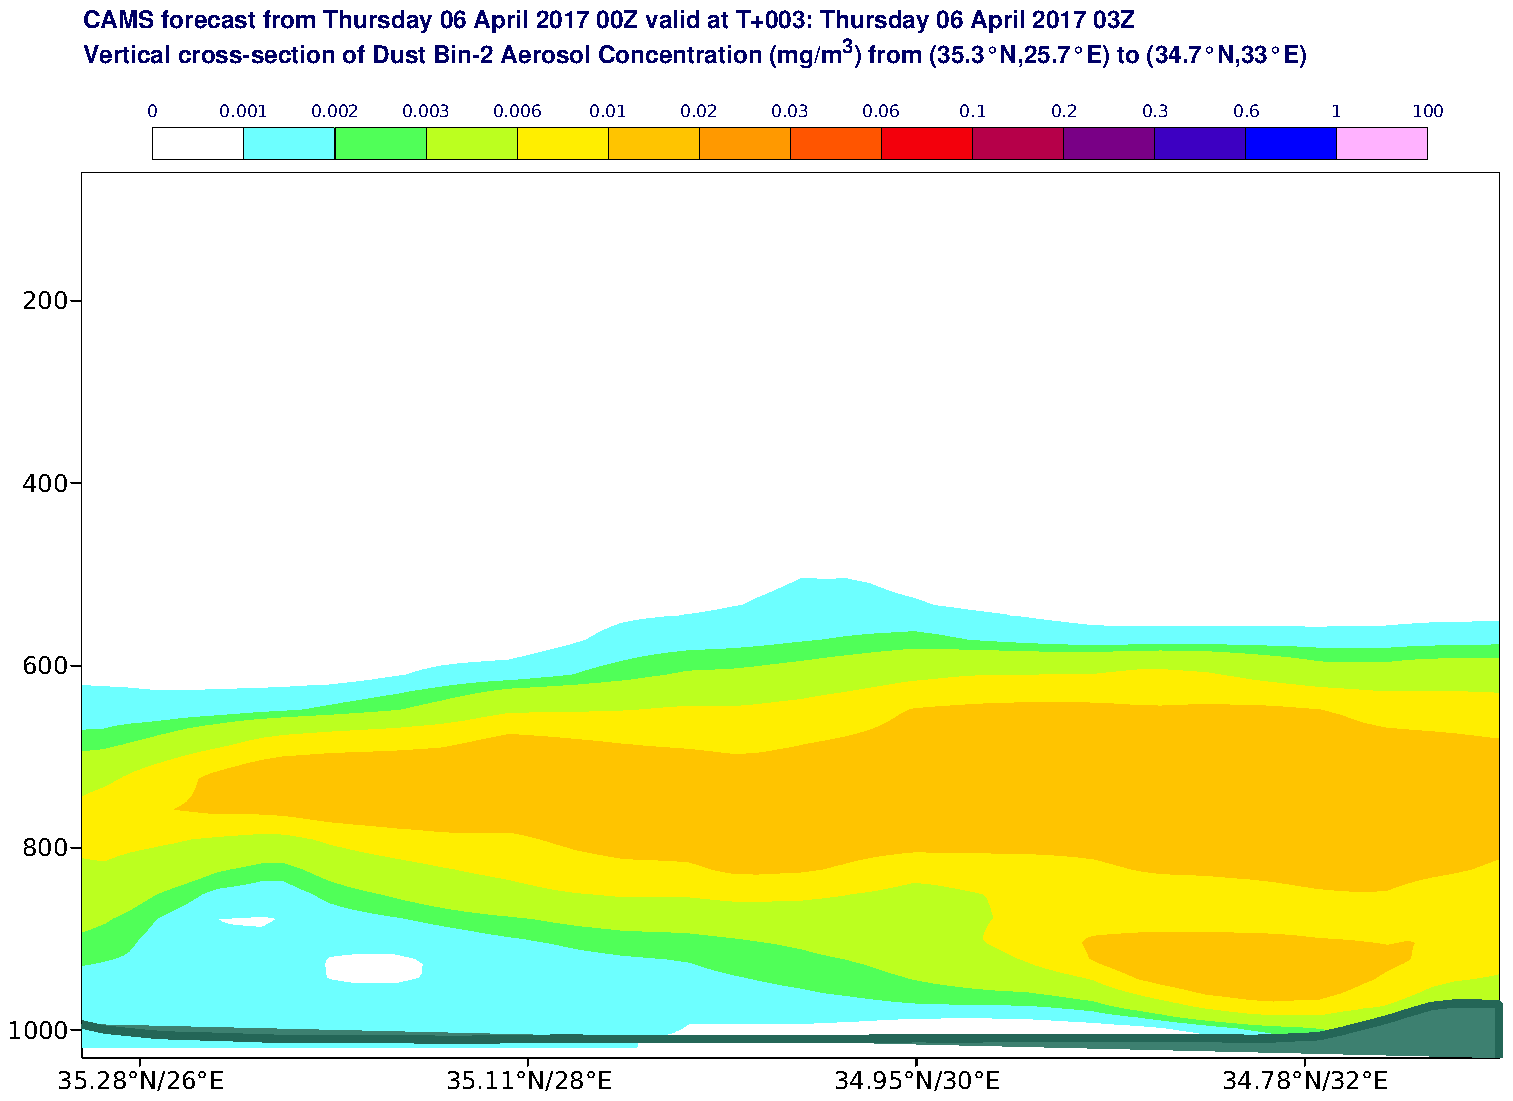 Vertical cross-section of Dust Bin-2 Aerosol Concentration (mg/m3) valid at T3 - 2017-04-06 03:00